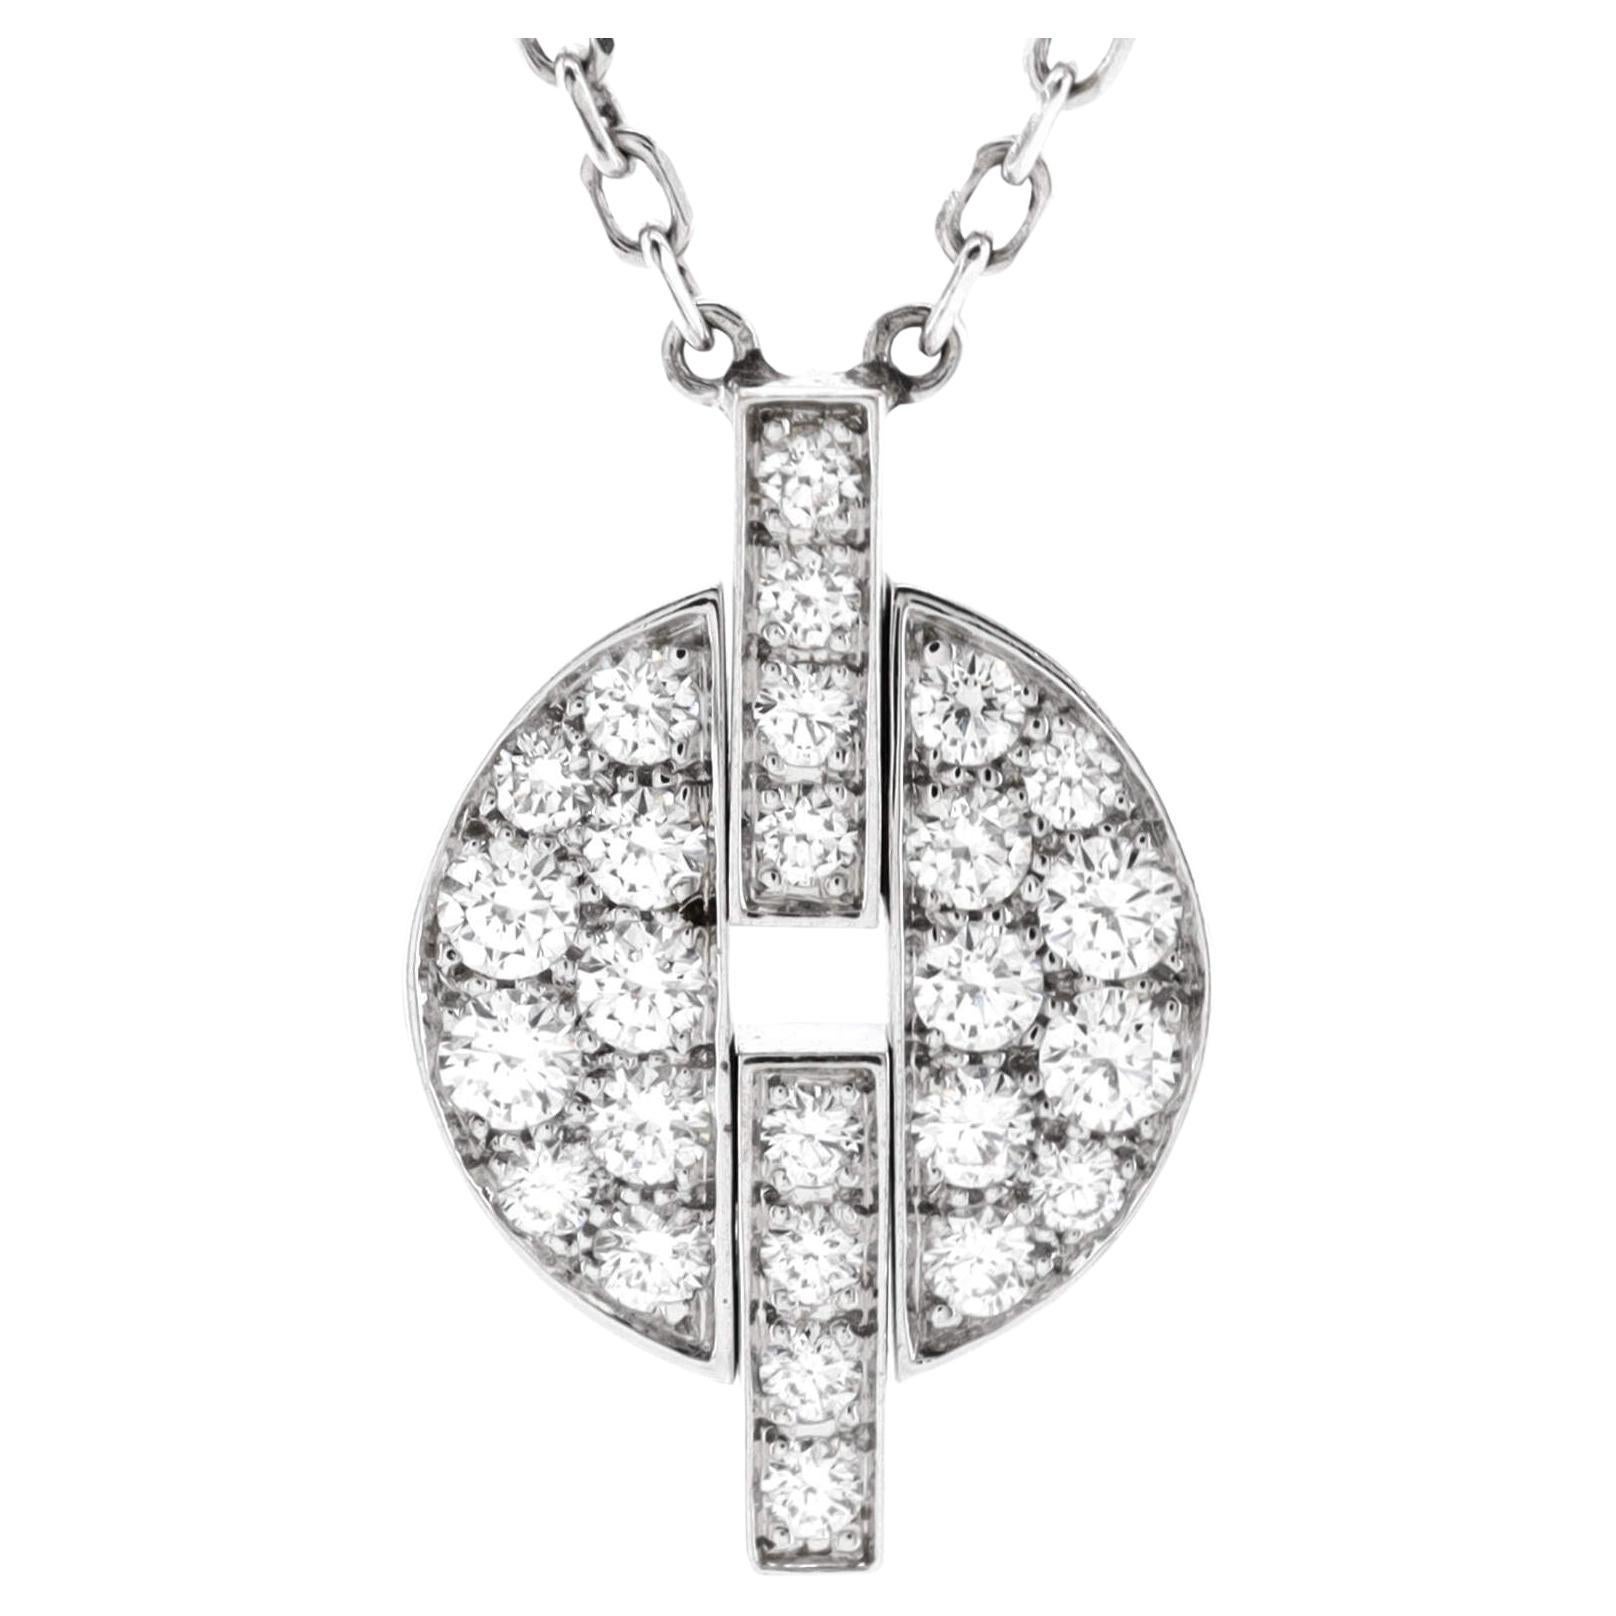 Louis Vuitton® Idylle Blossom Pendant, White Gold And Diamonds  Pink gold  jewelry, Womens jewelry necklace, Louis vuitton jewelry